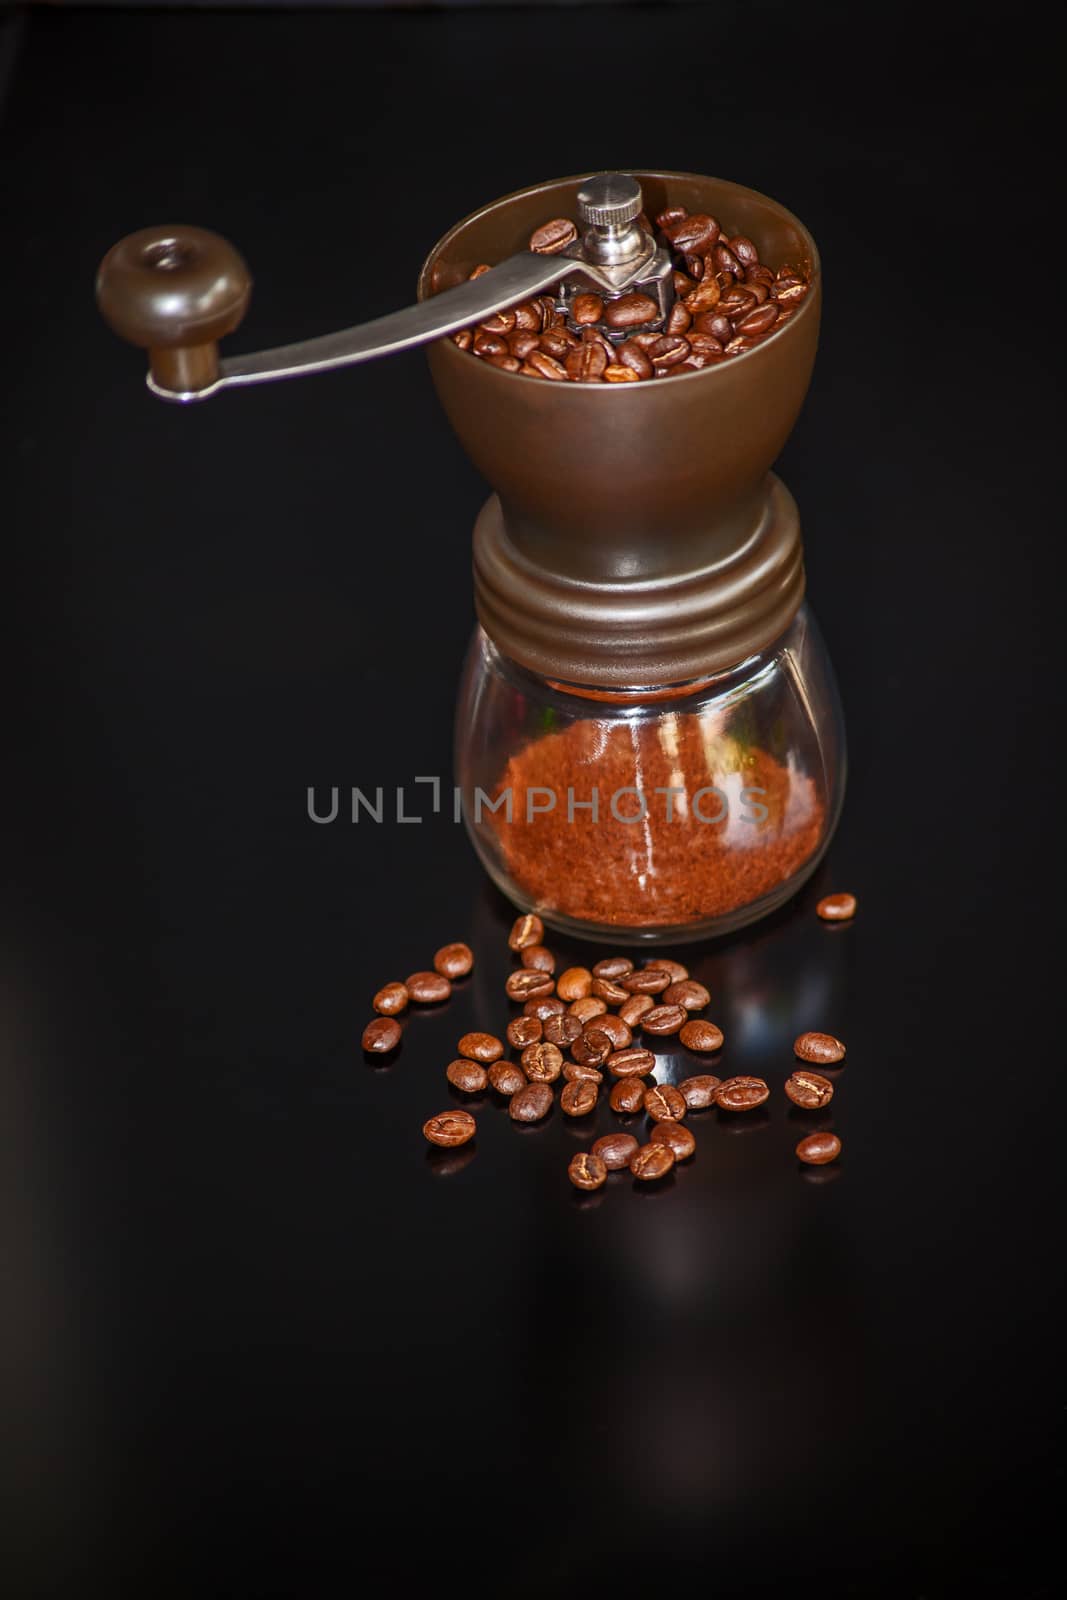 Coffee grinder with beans 13168 by kobus_peche